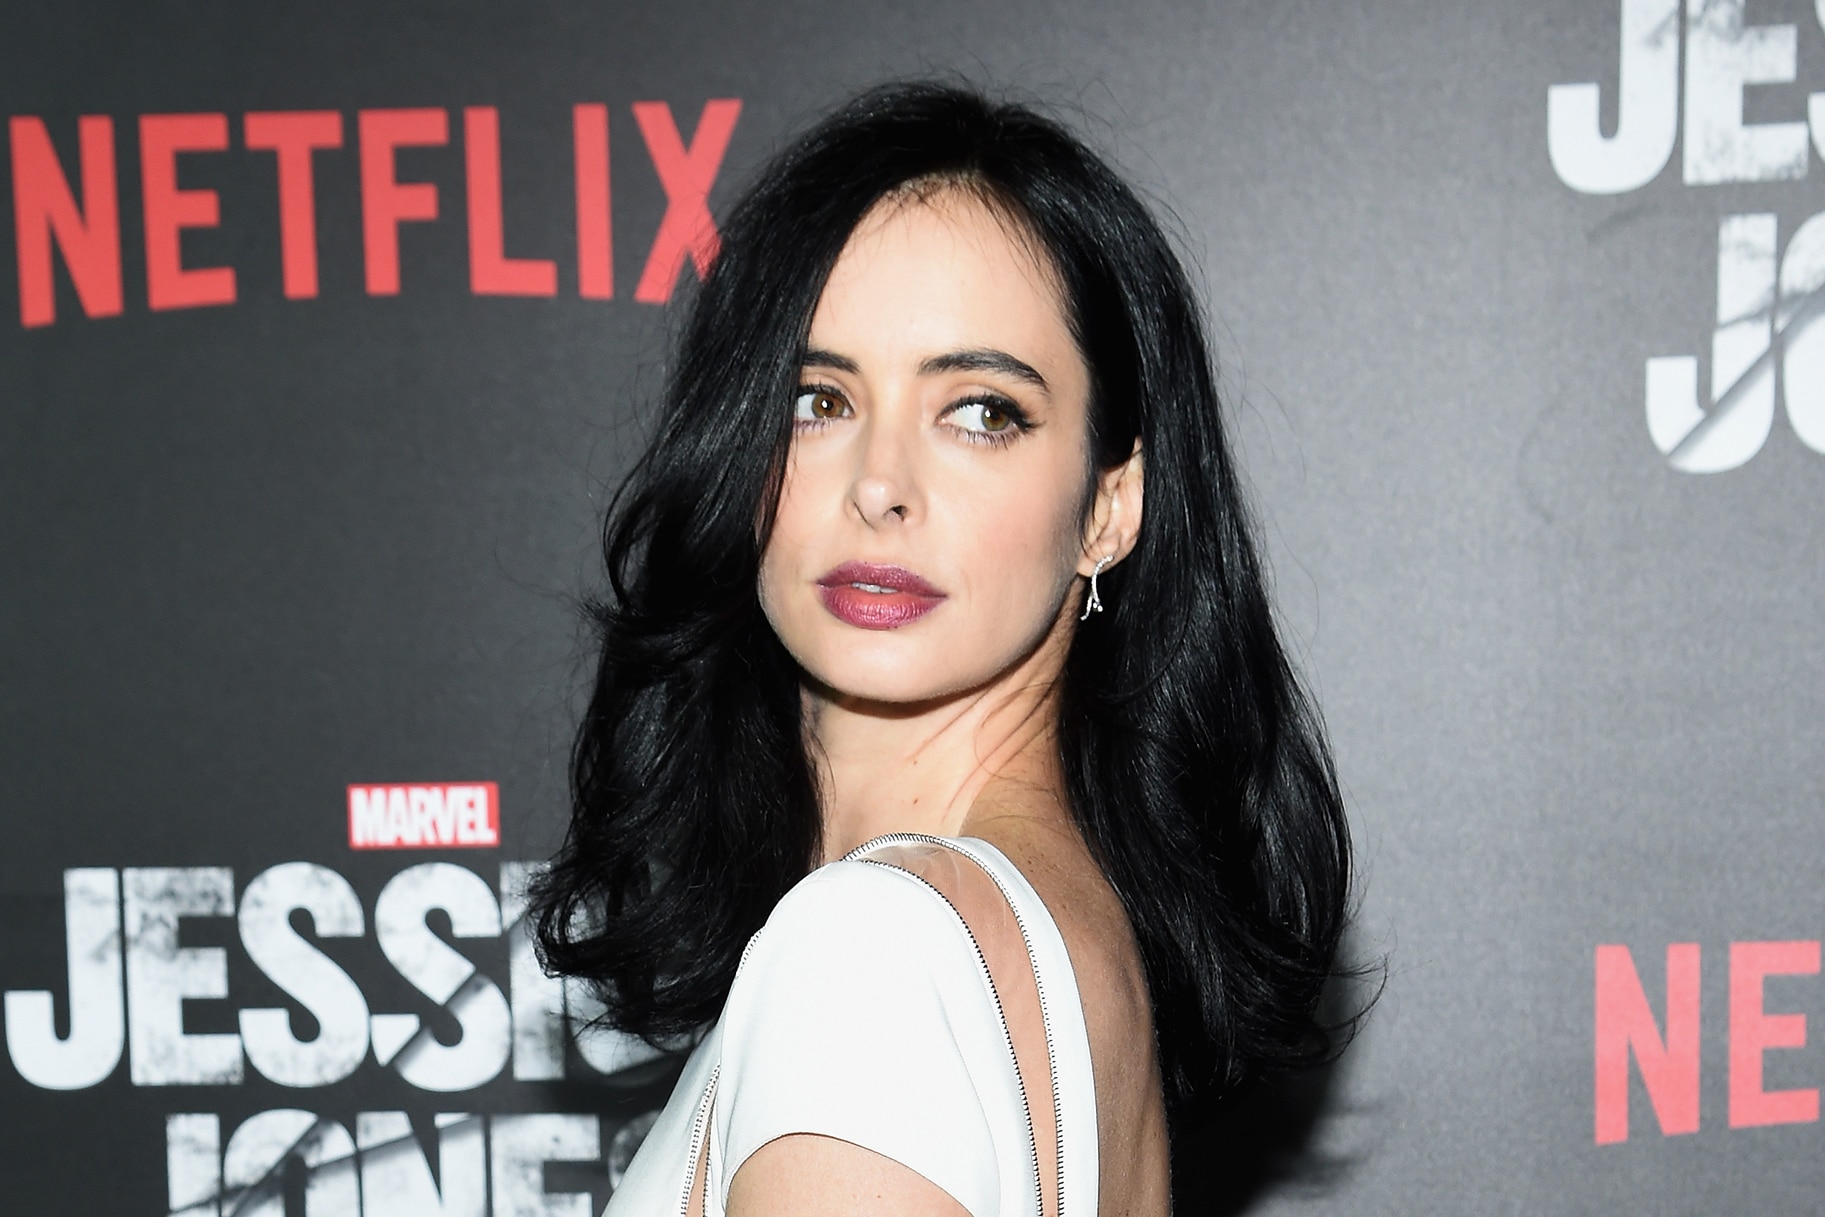 Everything You Need To Know About Krysten Ritter, The Star Of 'Jessica Jones’ | Very ...1825 x 1217